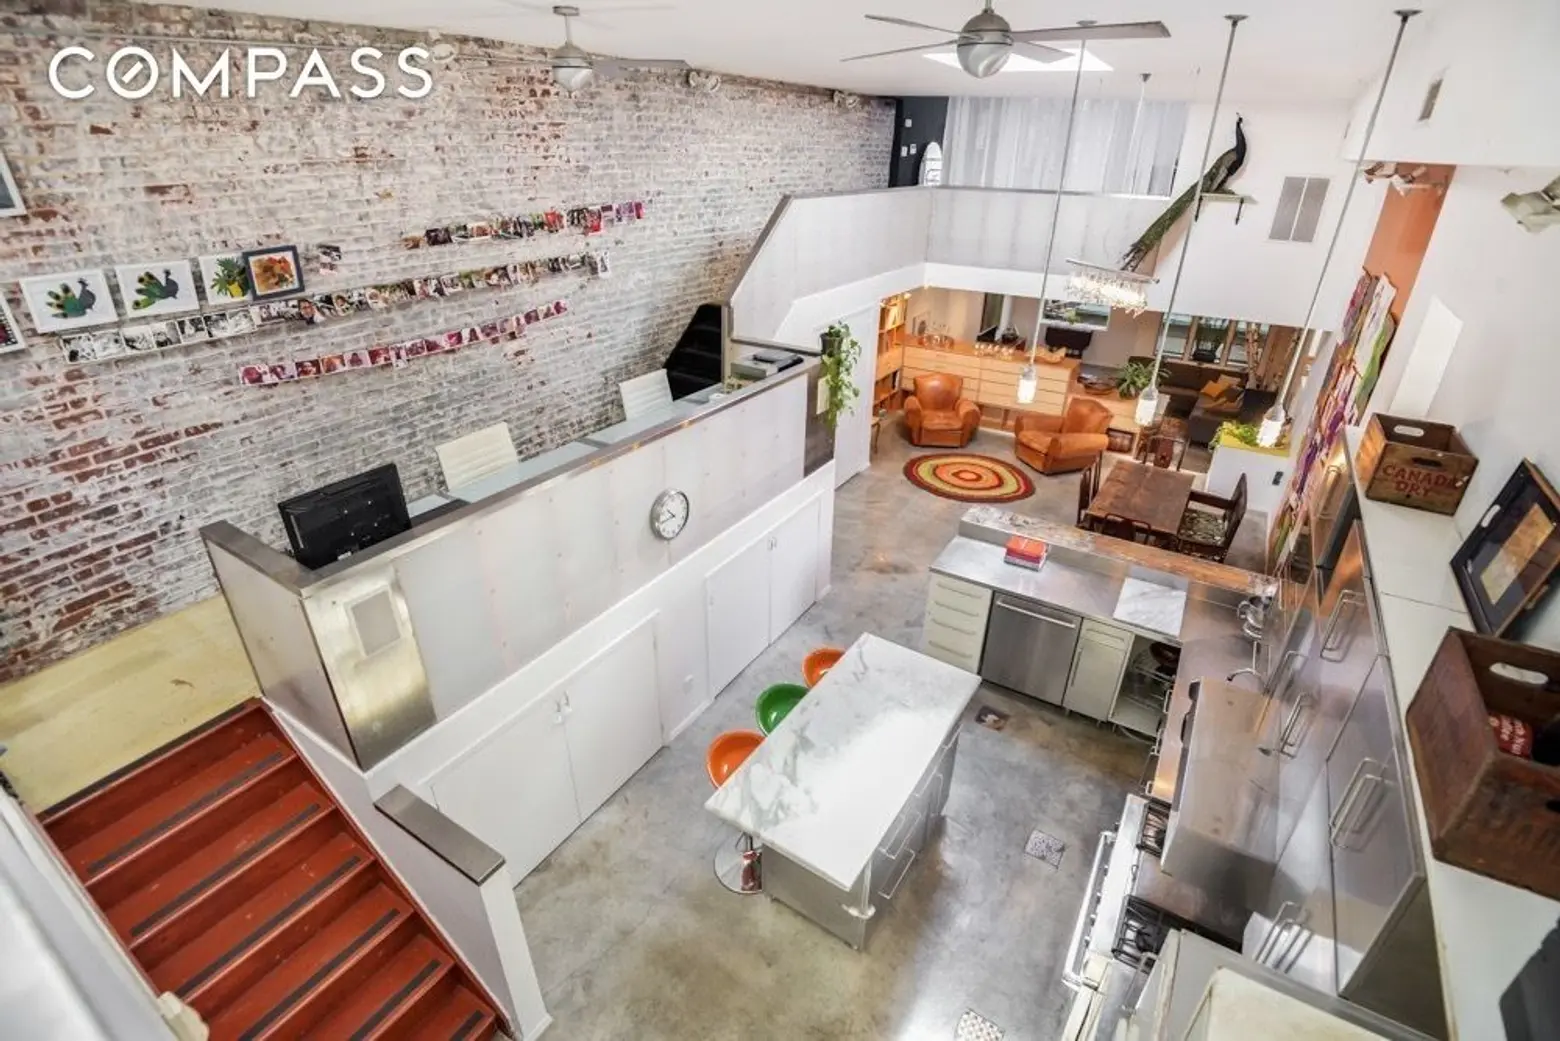 $2M garage conversion in Bed-Stuy has a zen atrium and industrial glamour